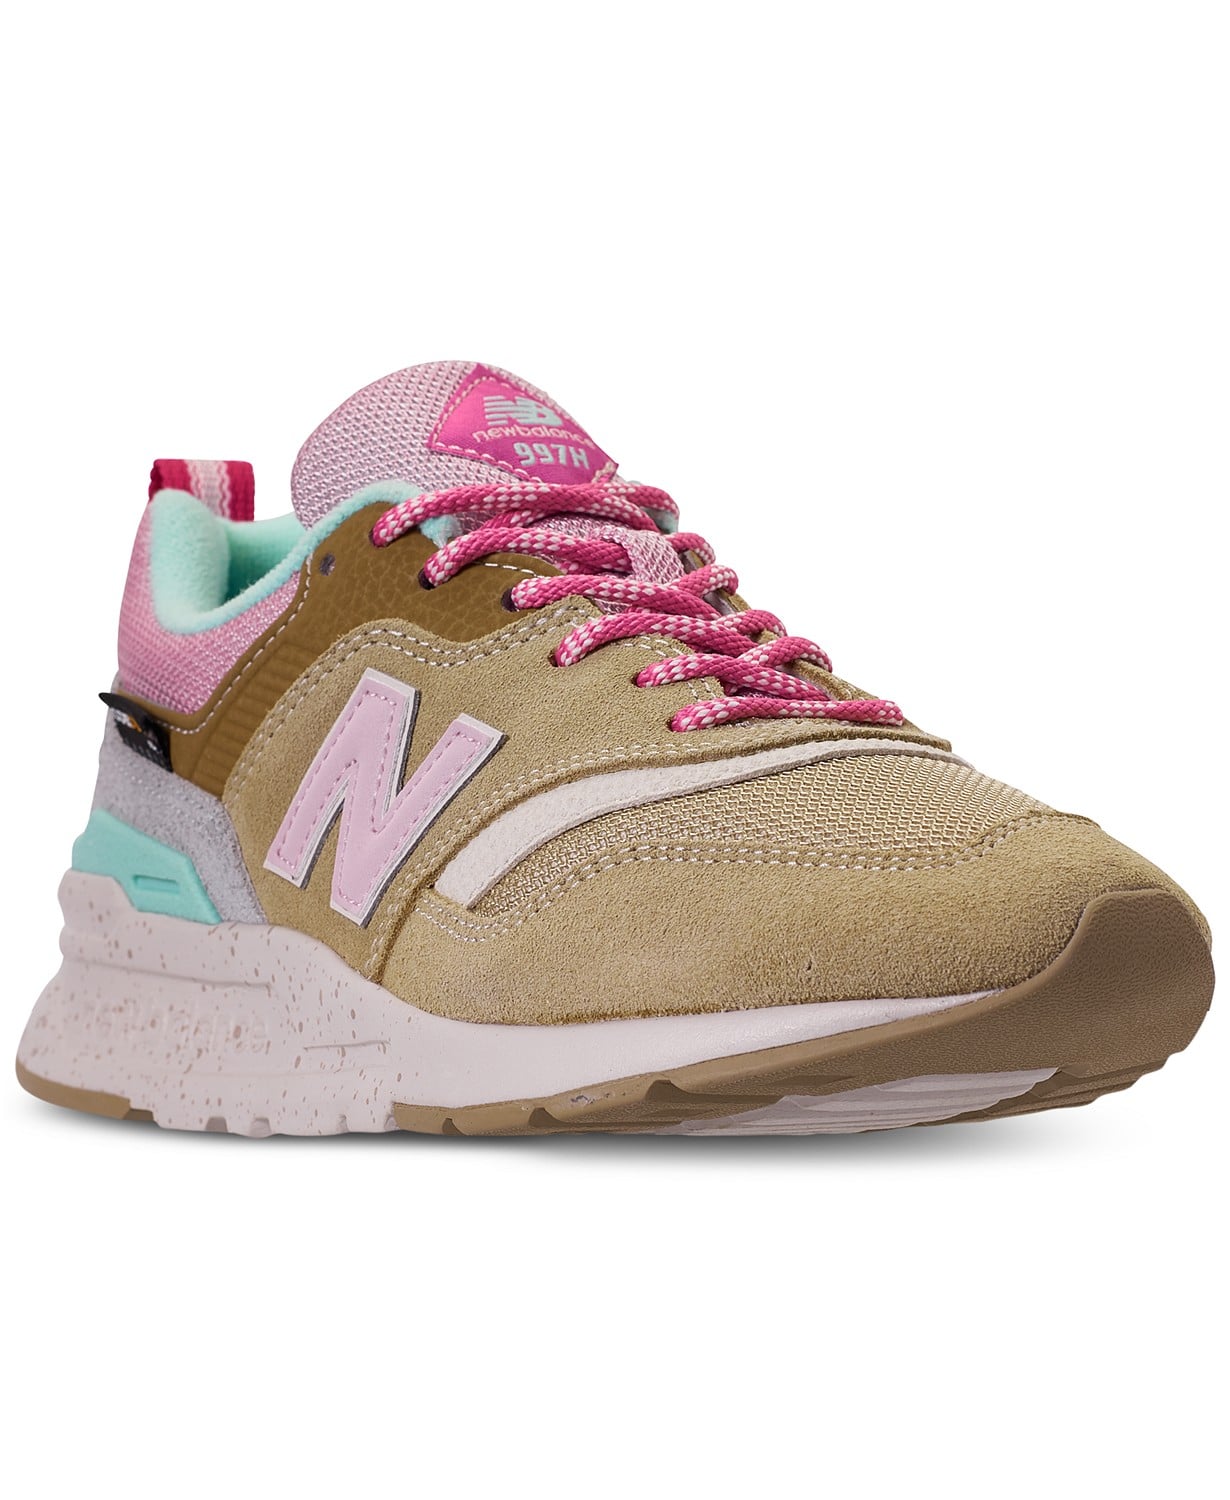 New Balance 997 Casual Sneakers